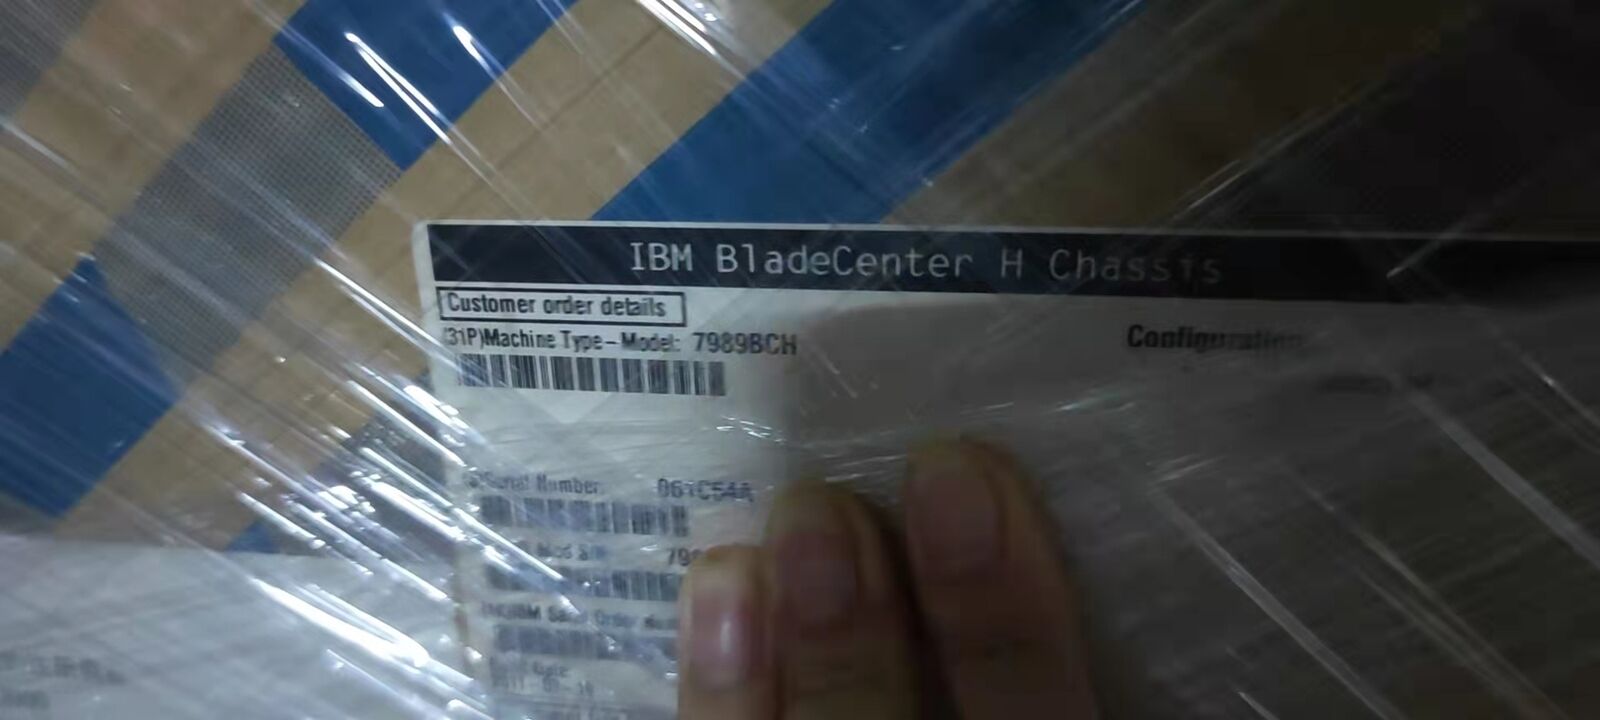 IBM BladeCenter H Chassis 7889BCH 061C54A with K3G200-AC56-12  69Y5844 Power S